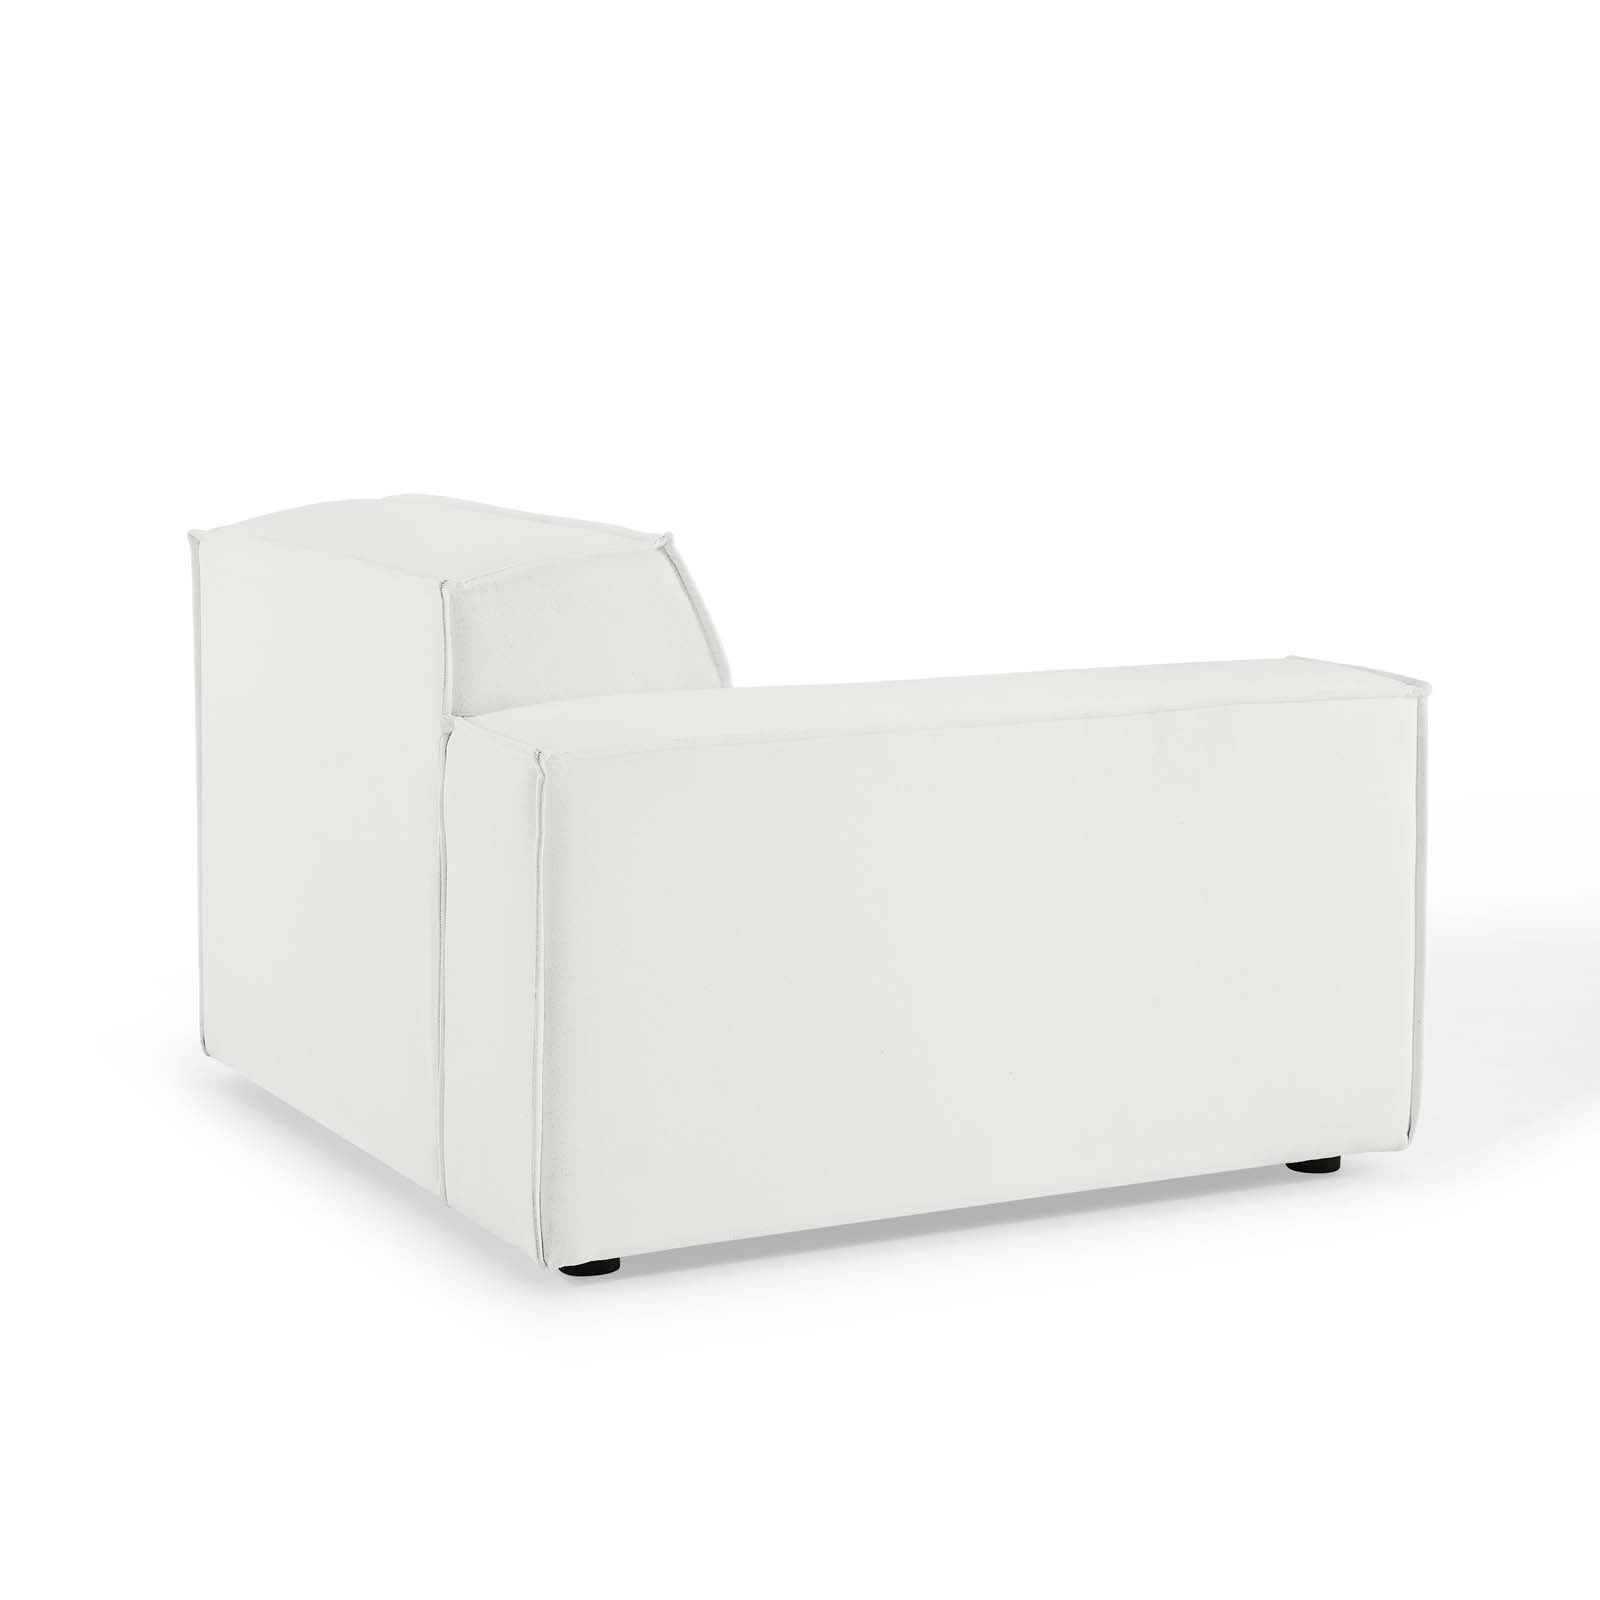 Modway Sectional Sofas - Restore 3-Piece Sectional Sofa White